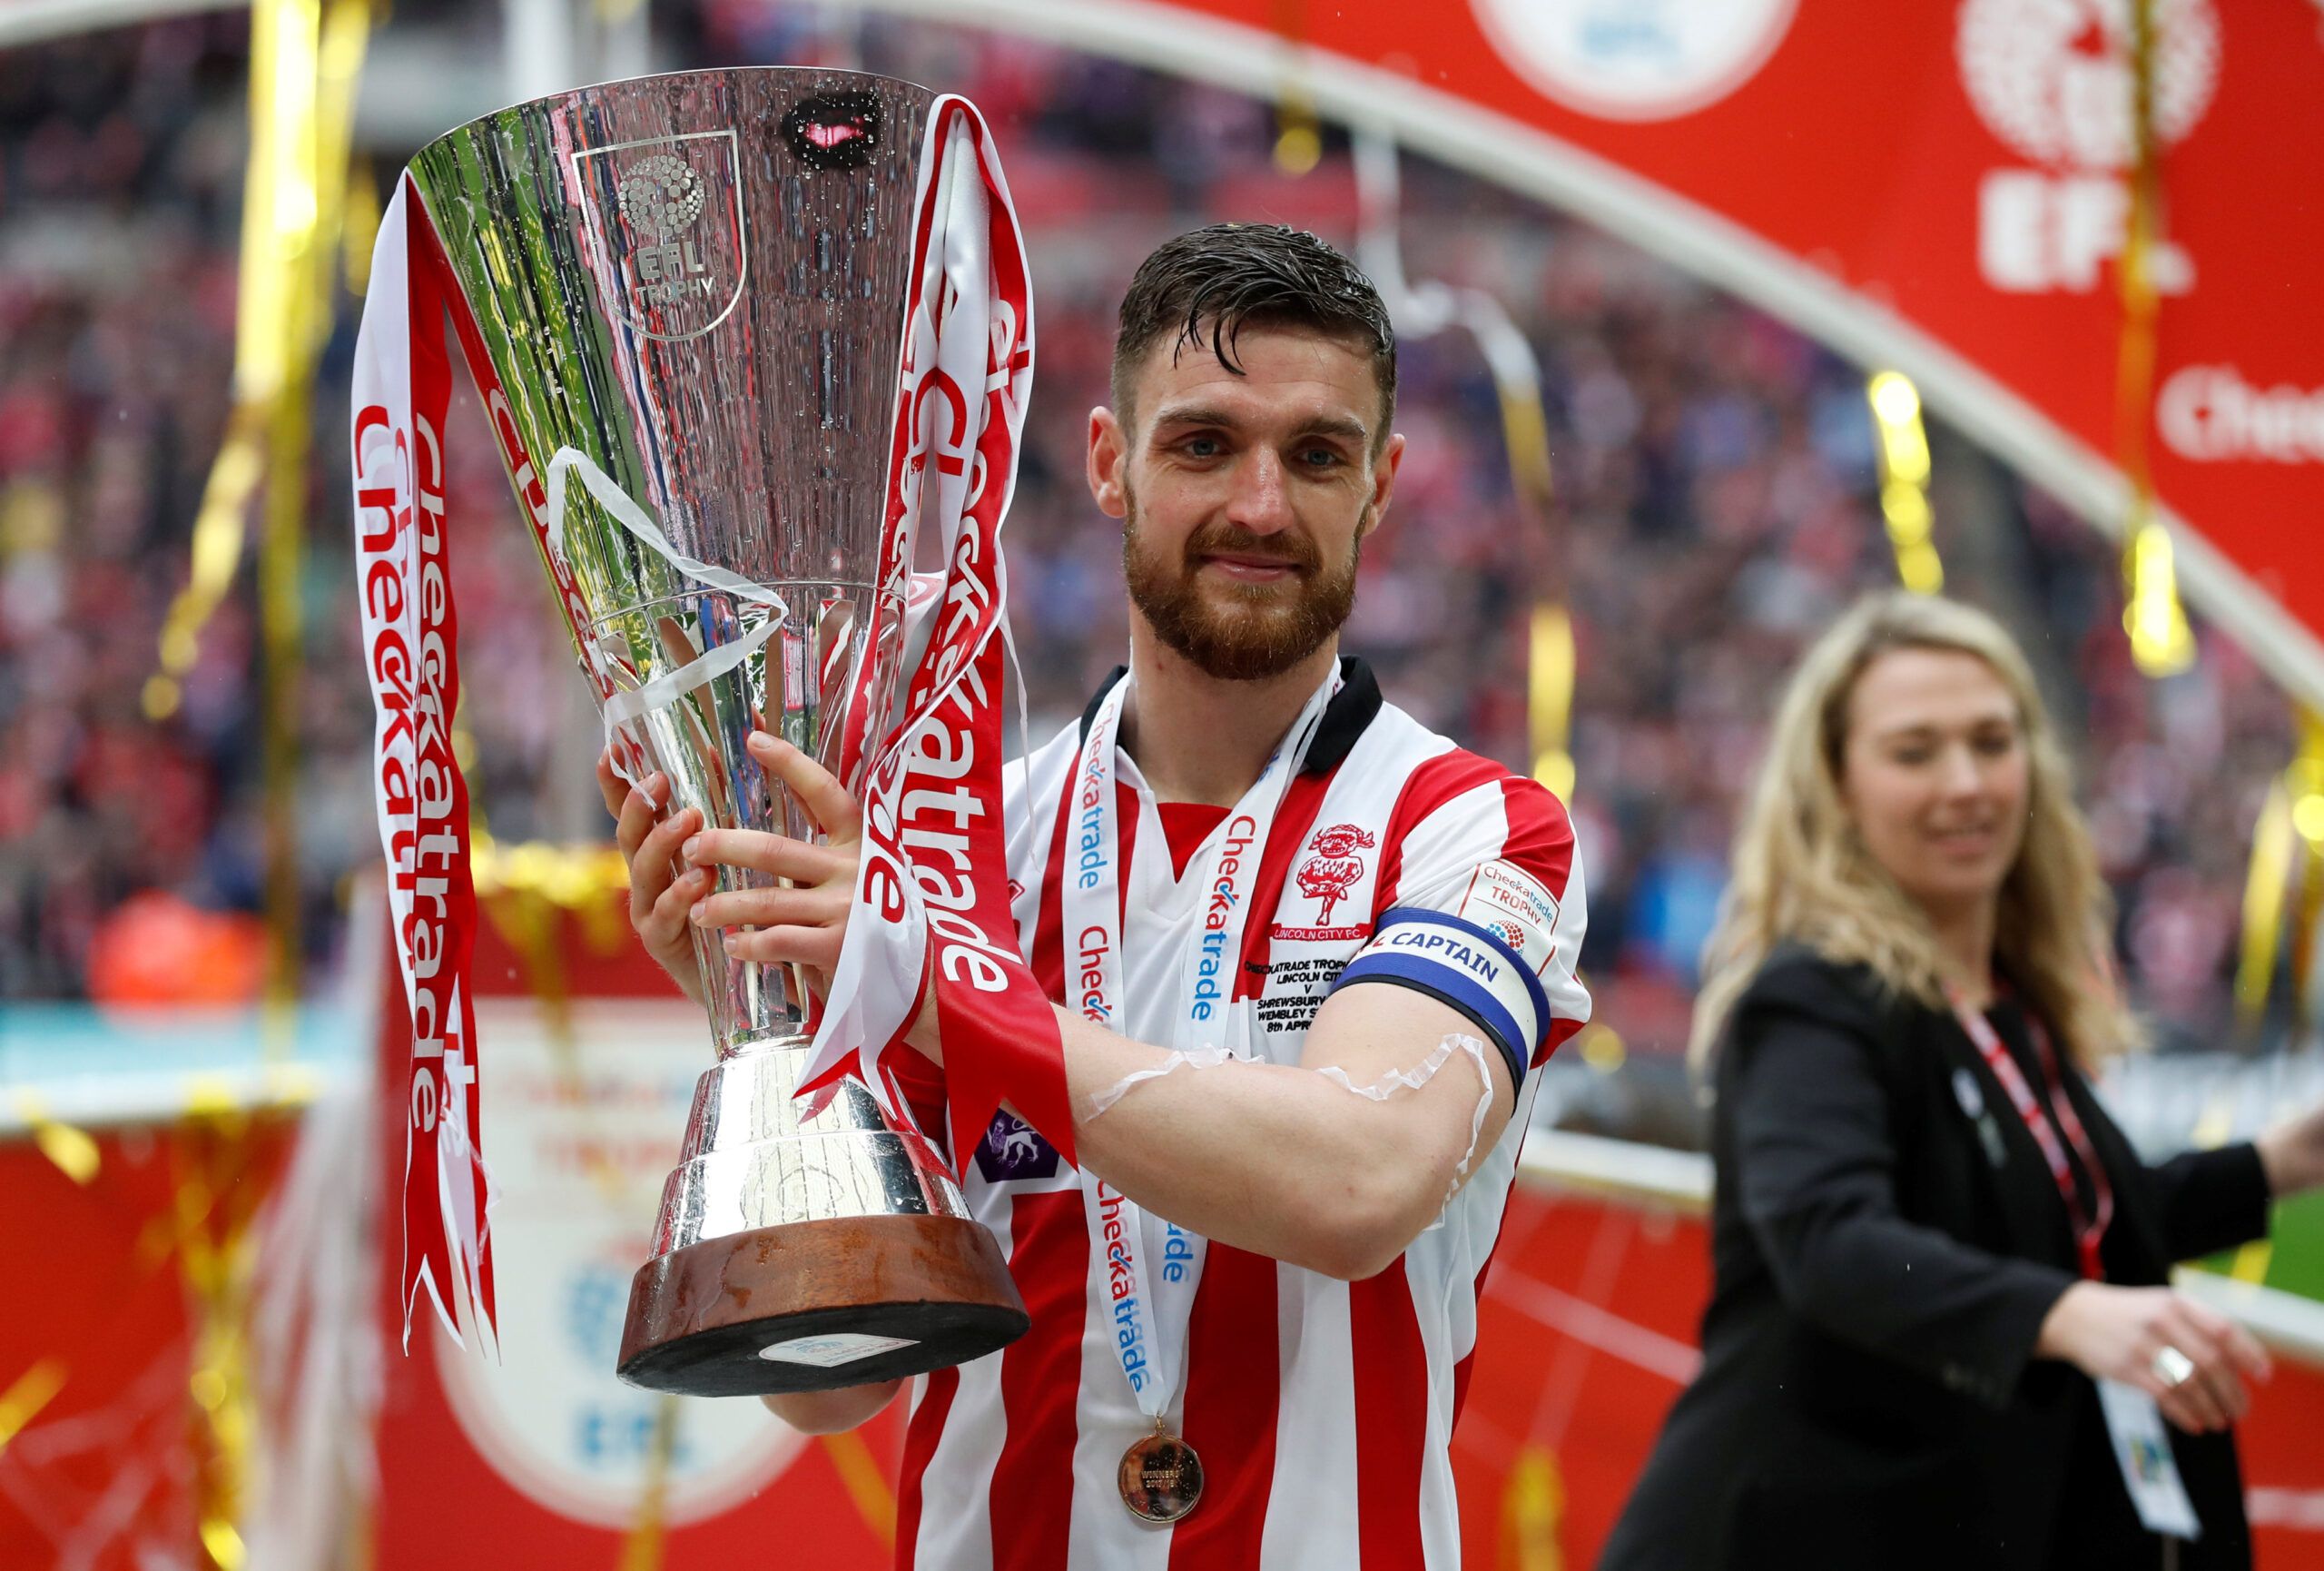 Soccer Football - Checkatrade Trophy Final - Lincoln City vs Shrewsbury Town - Wembley Stadium, London, Britain - April 8, 2018  Lincoln CityÕs Luke Waterfall celebrates with the trophy after winning the Checkatrade Trophy Final  Action Images/Matthew Childs  EDITORIAL USE ONLY. No use with unauthorized audio, video, data, fixture lists, club/league logos or 